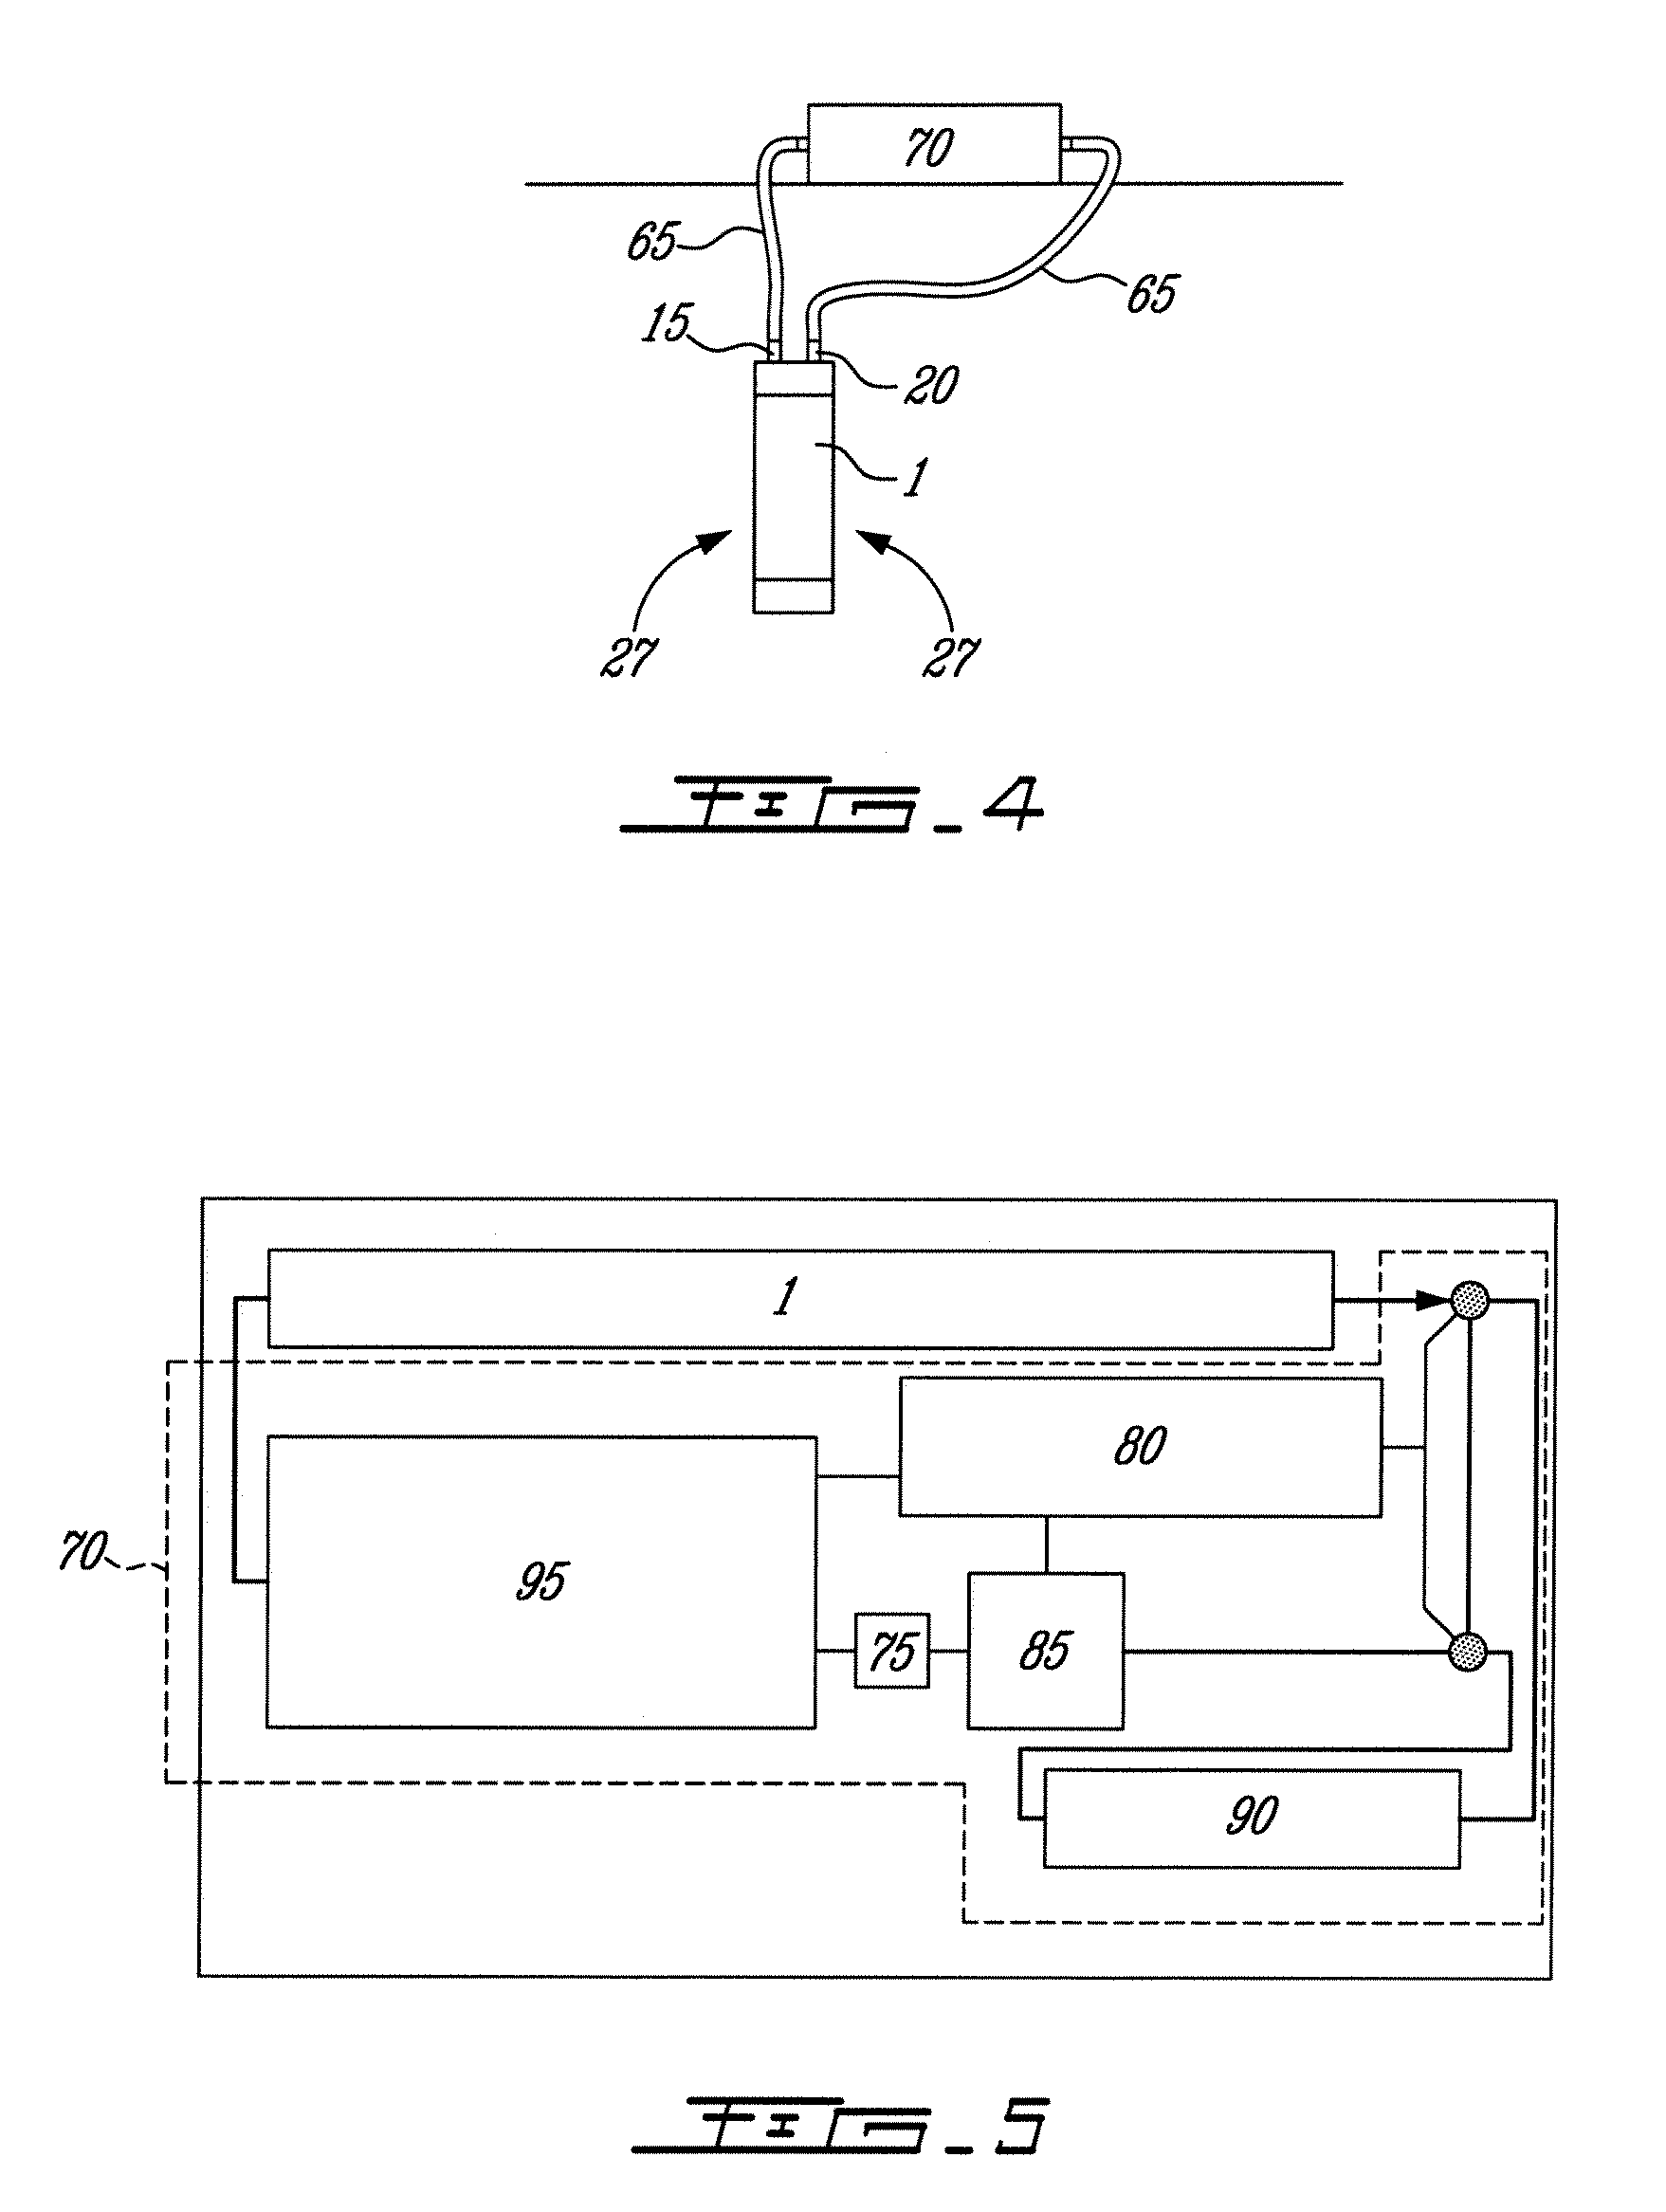 Apparatus and method for measuring soil gases